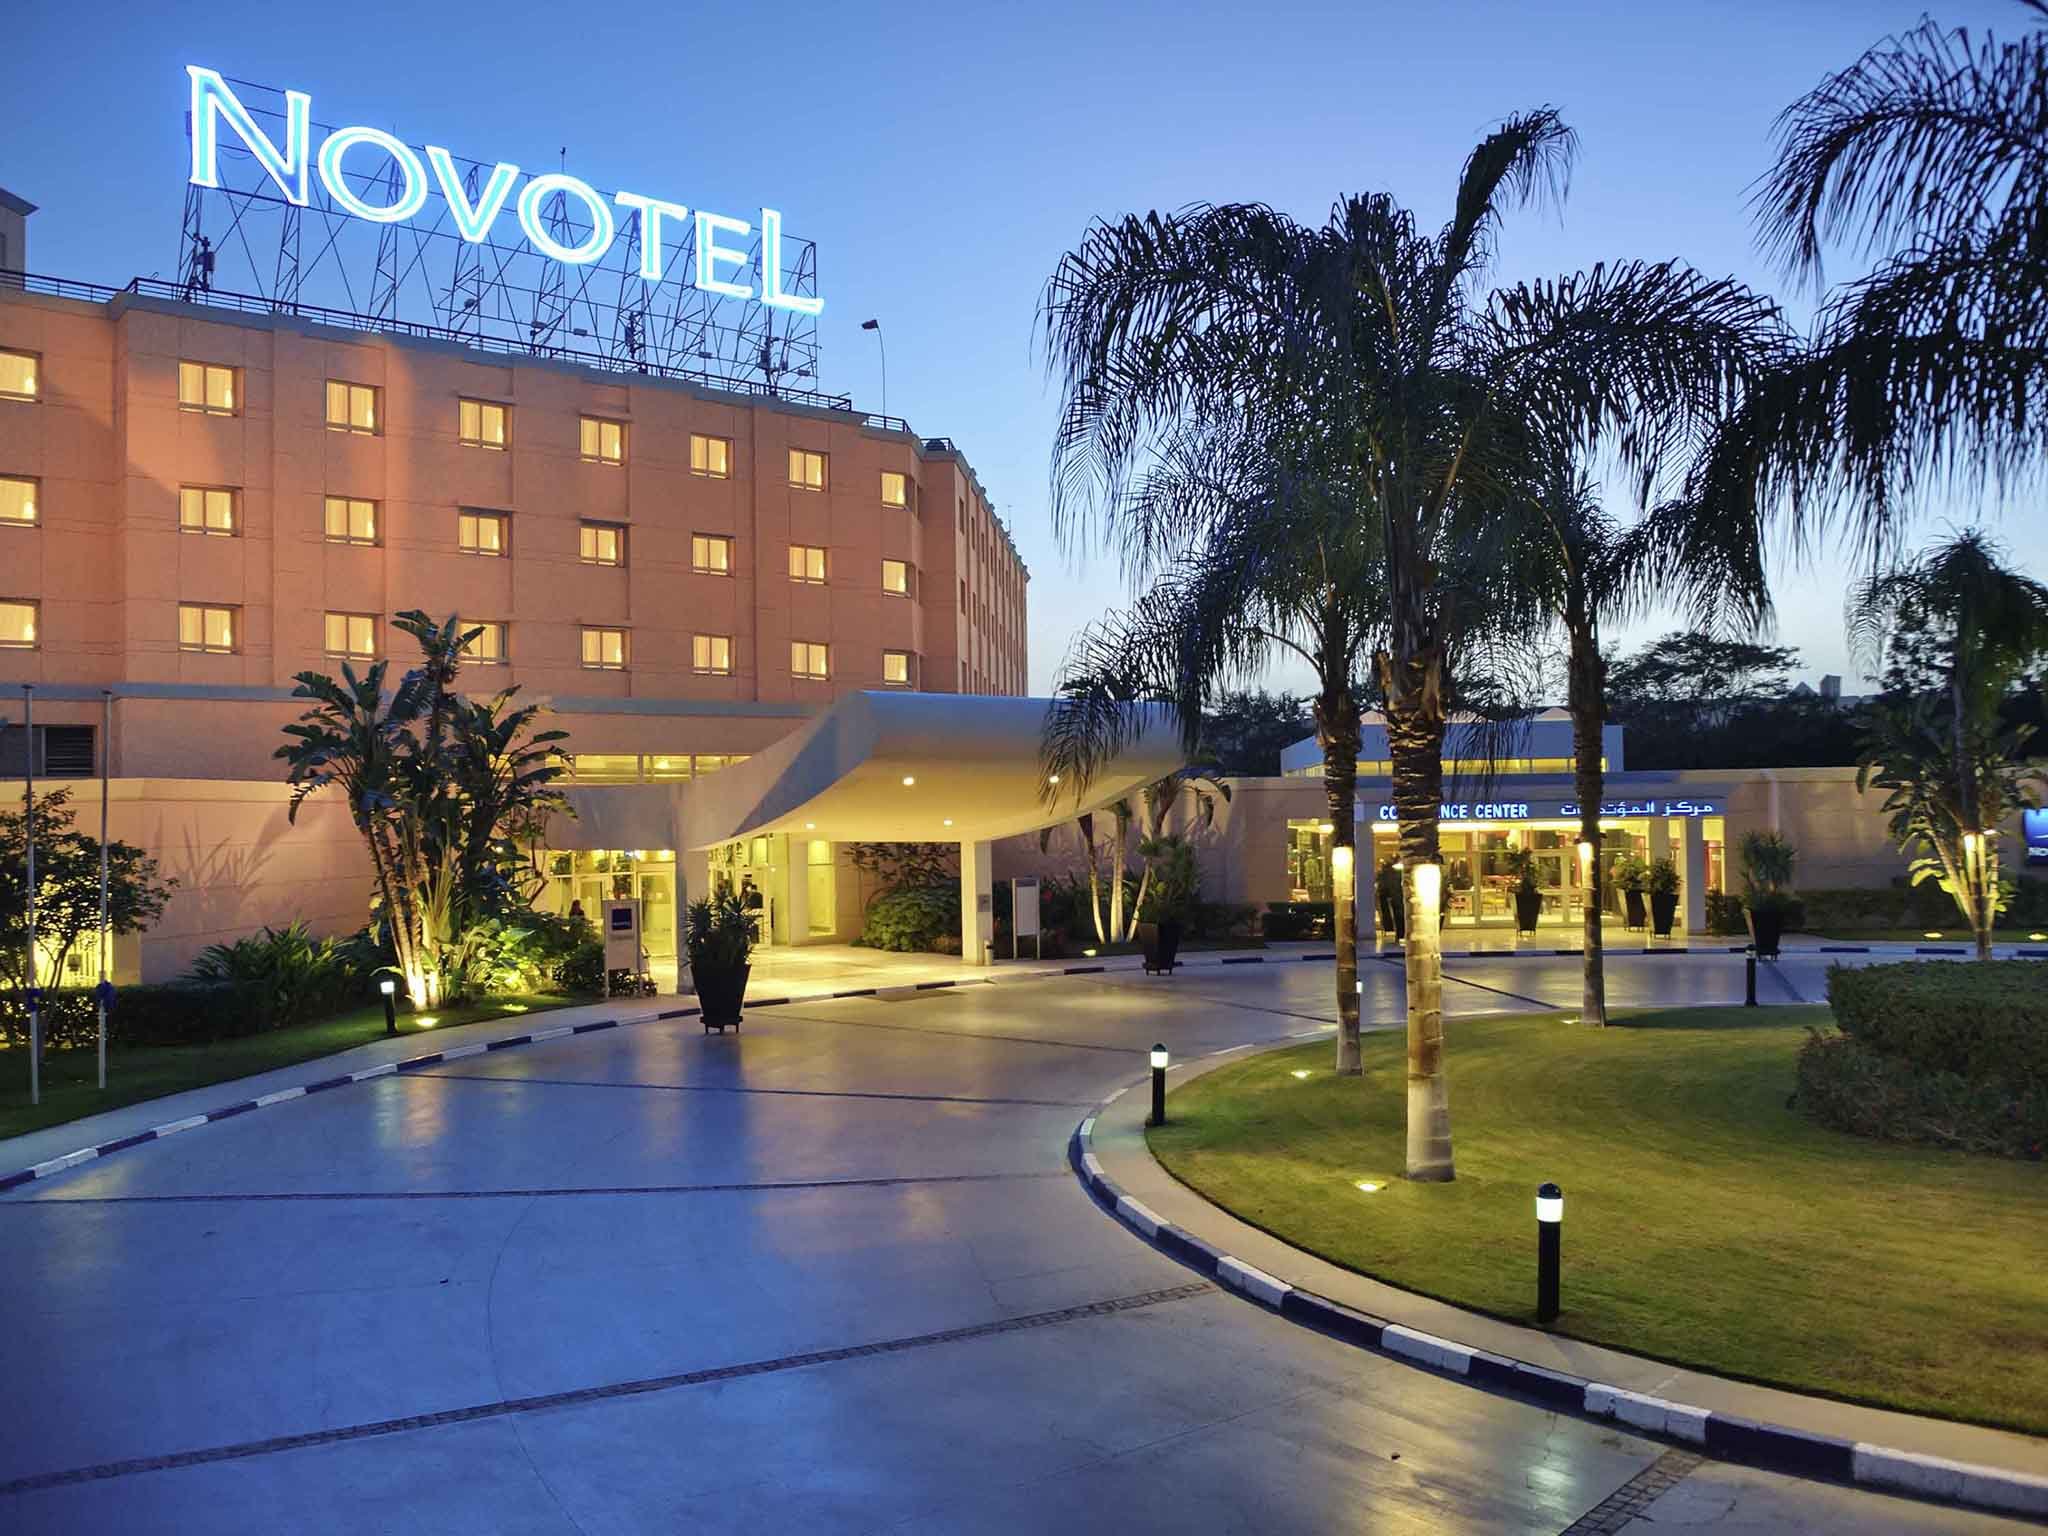 Novotel Cairo 6th of October image